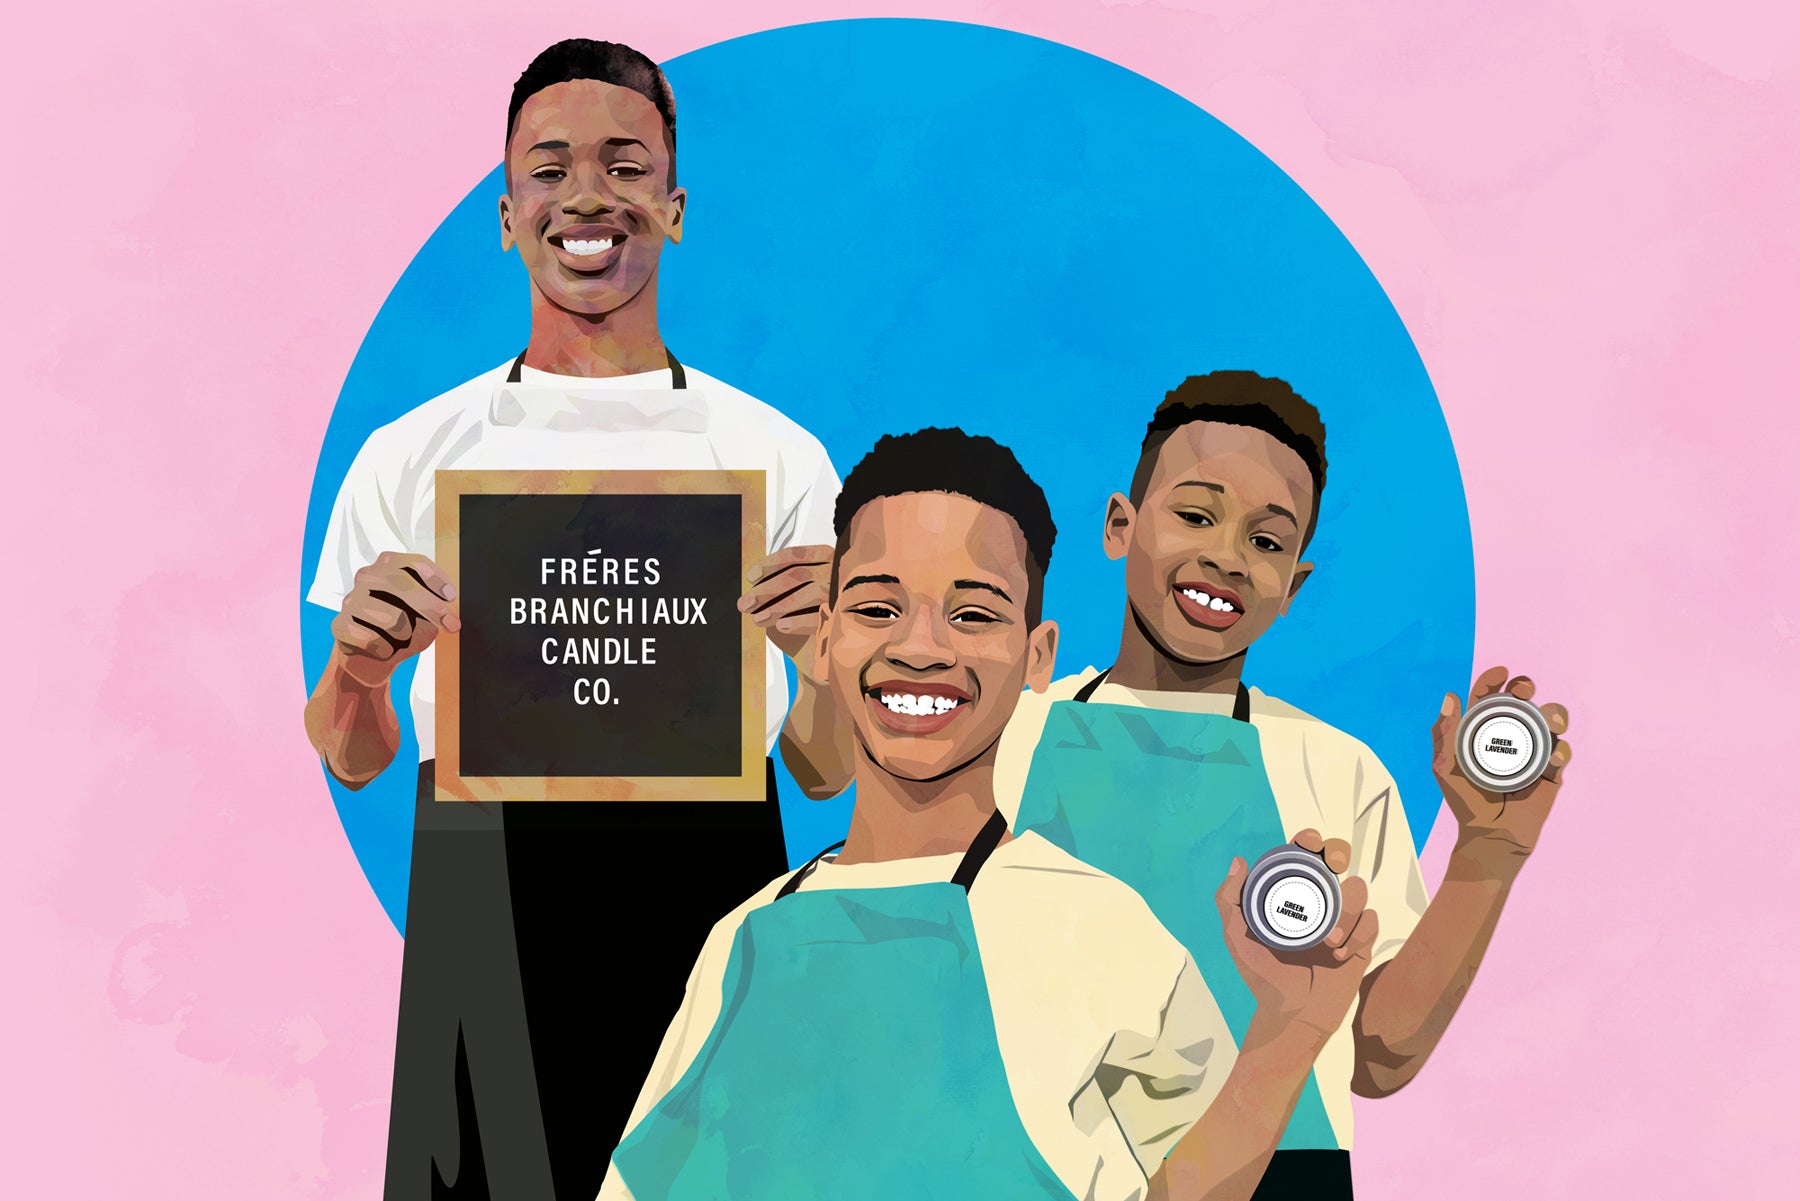 Illustration of the three sibling founders of Frères Branchiaux, smiling and holding their product. One holds a sign that reads "Frères Branchiaux Candle Co."